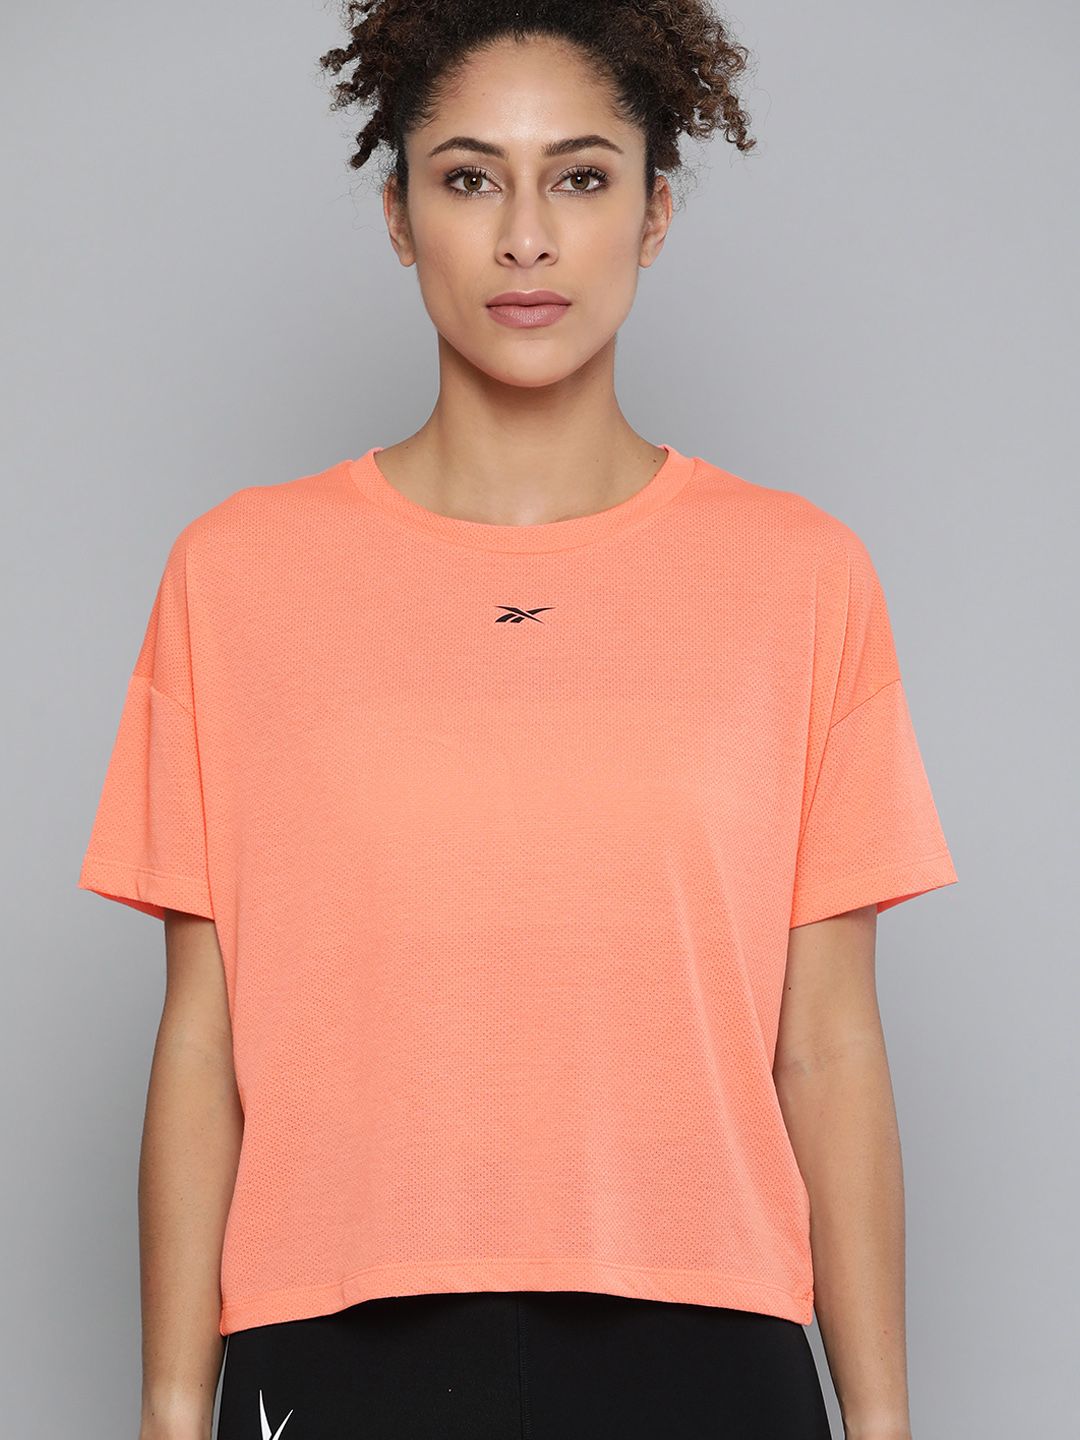 Reebok Women Peach-Coloured Solid Workout Ready Supremium T-Shirt Price in India